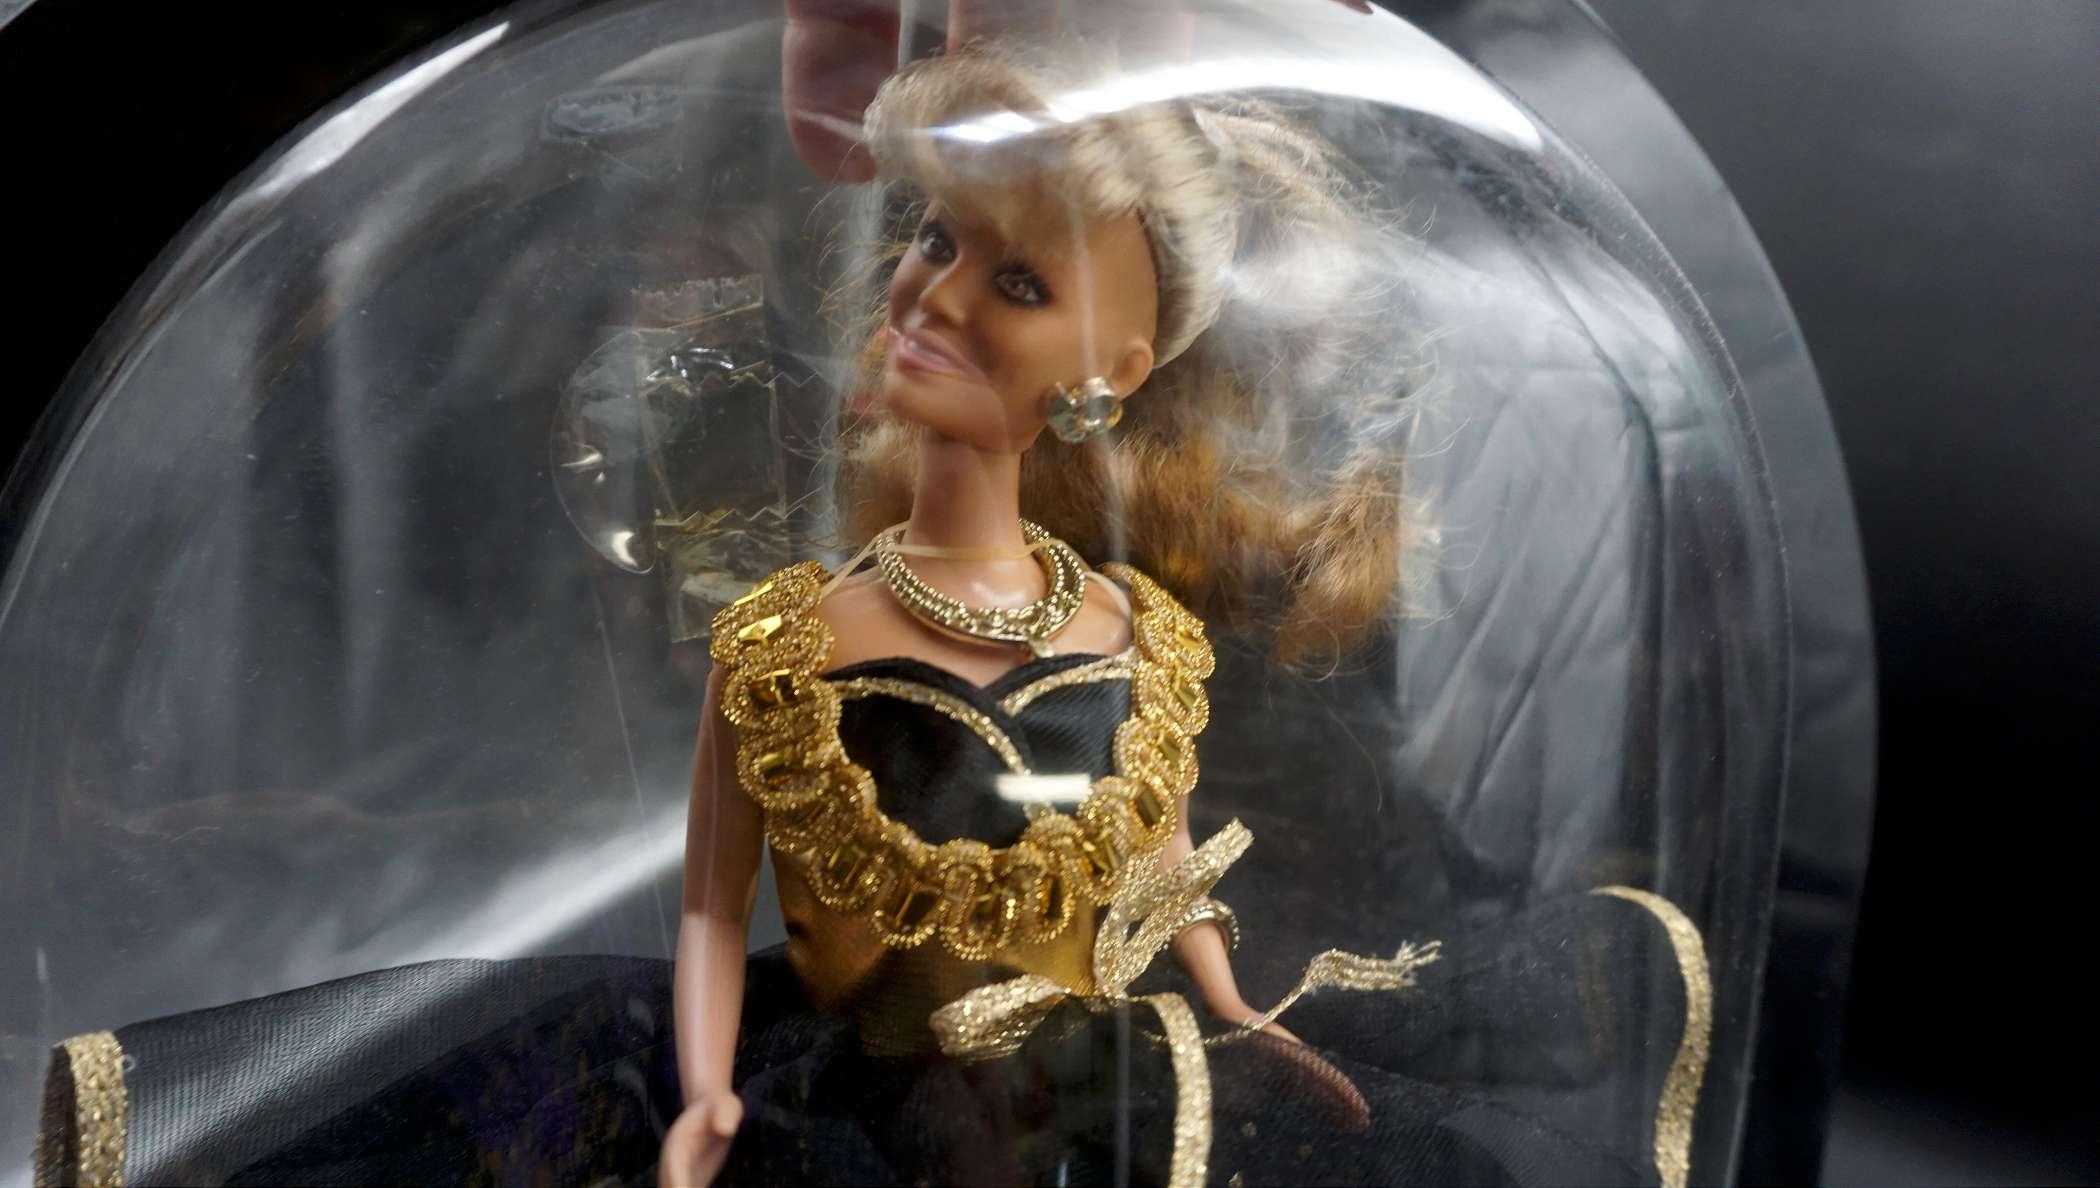 Vanna Gold Limited Edition Doll